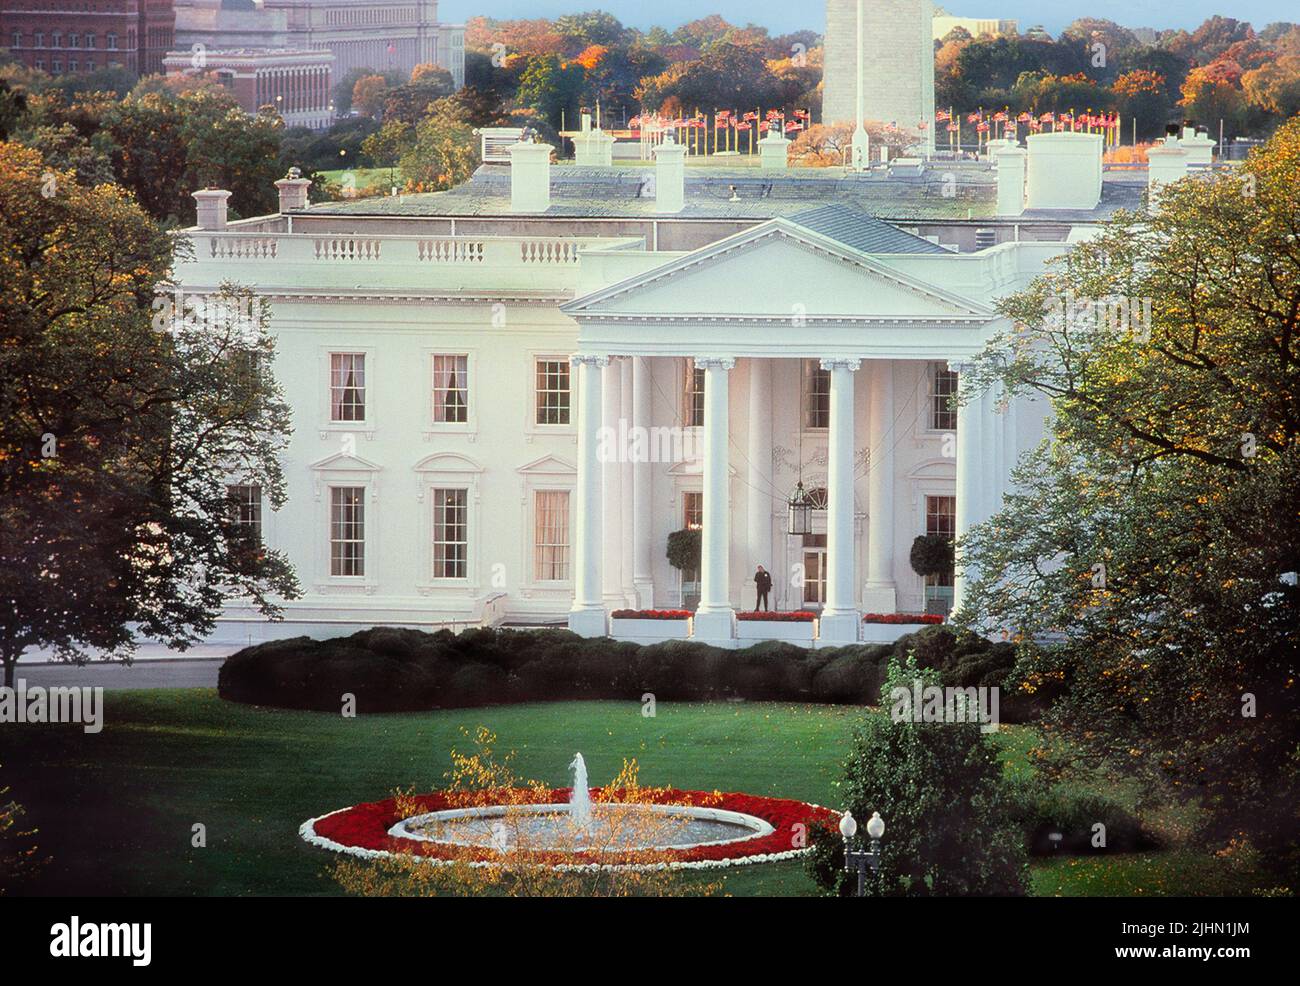 The White House Washington DC, United States of America, USA. Government building. American historic presidential residence. North facade or side. Stock Photo